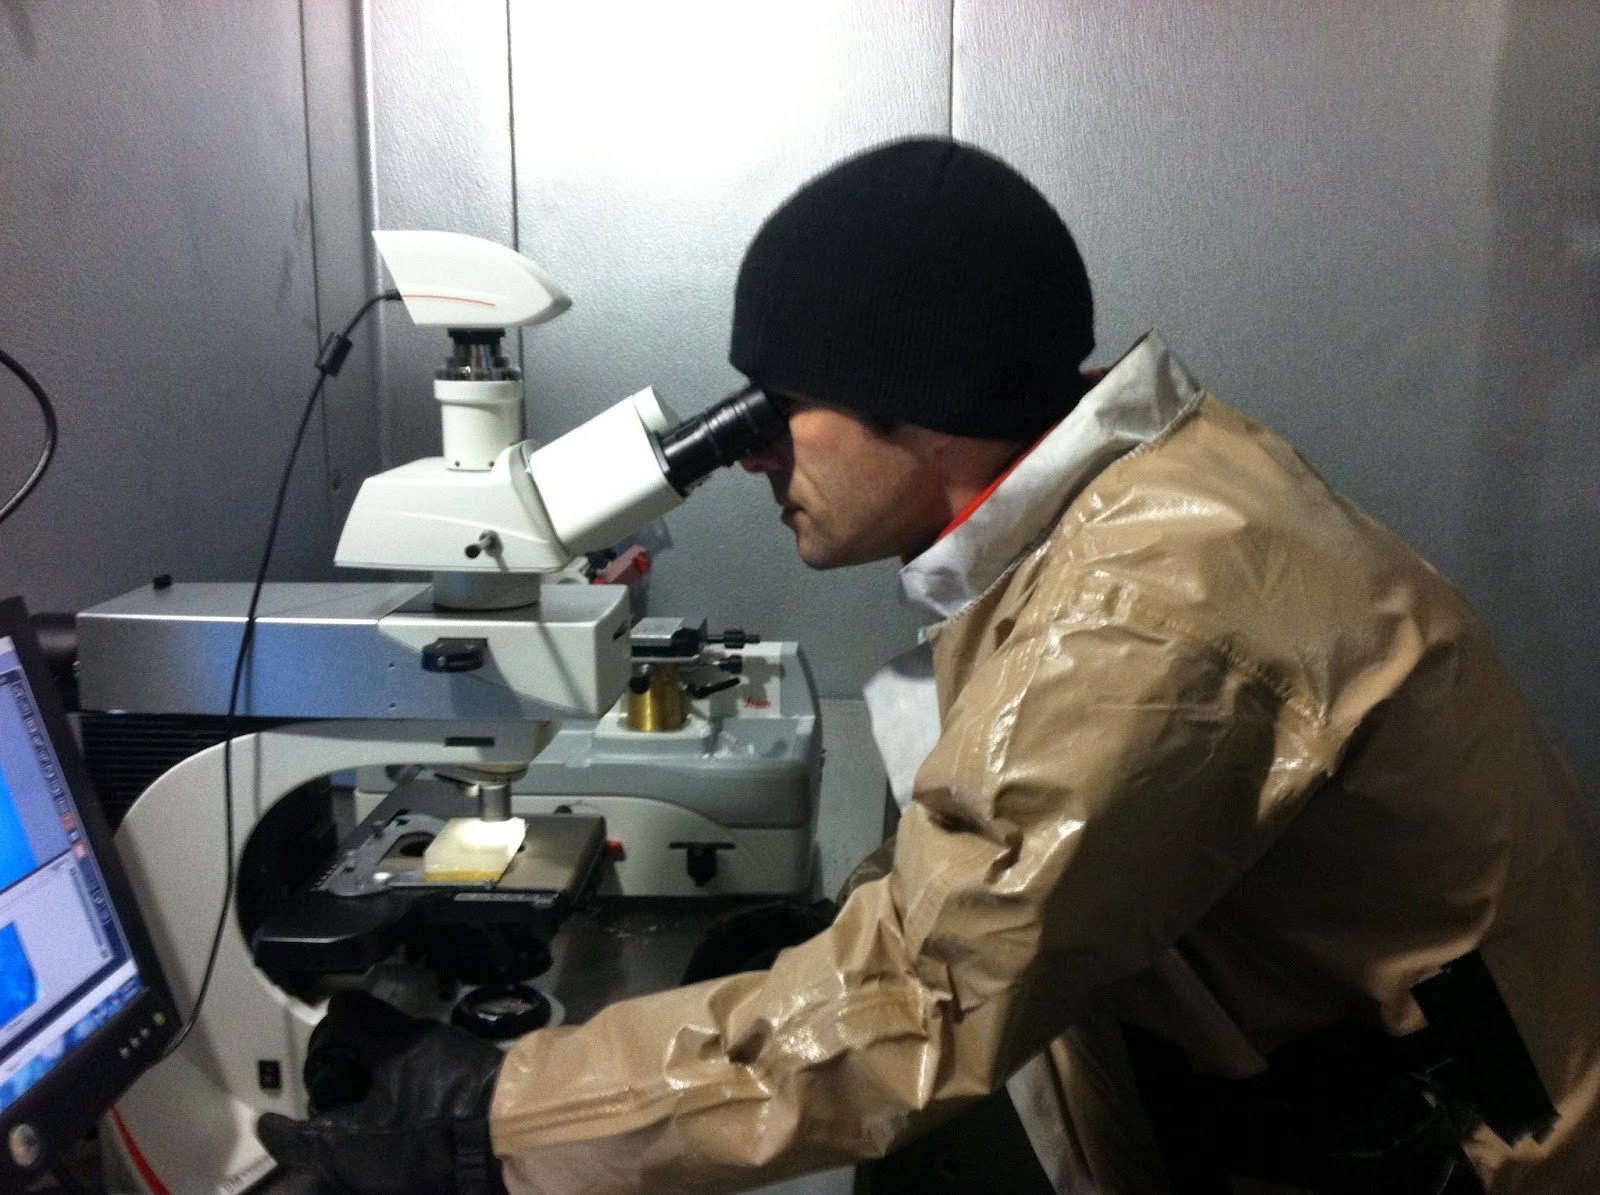 Mike Nielson quantifies grain growth in ice using the cold room microscope (2014).